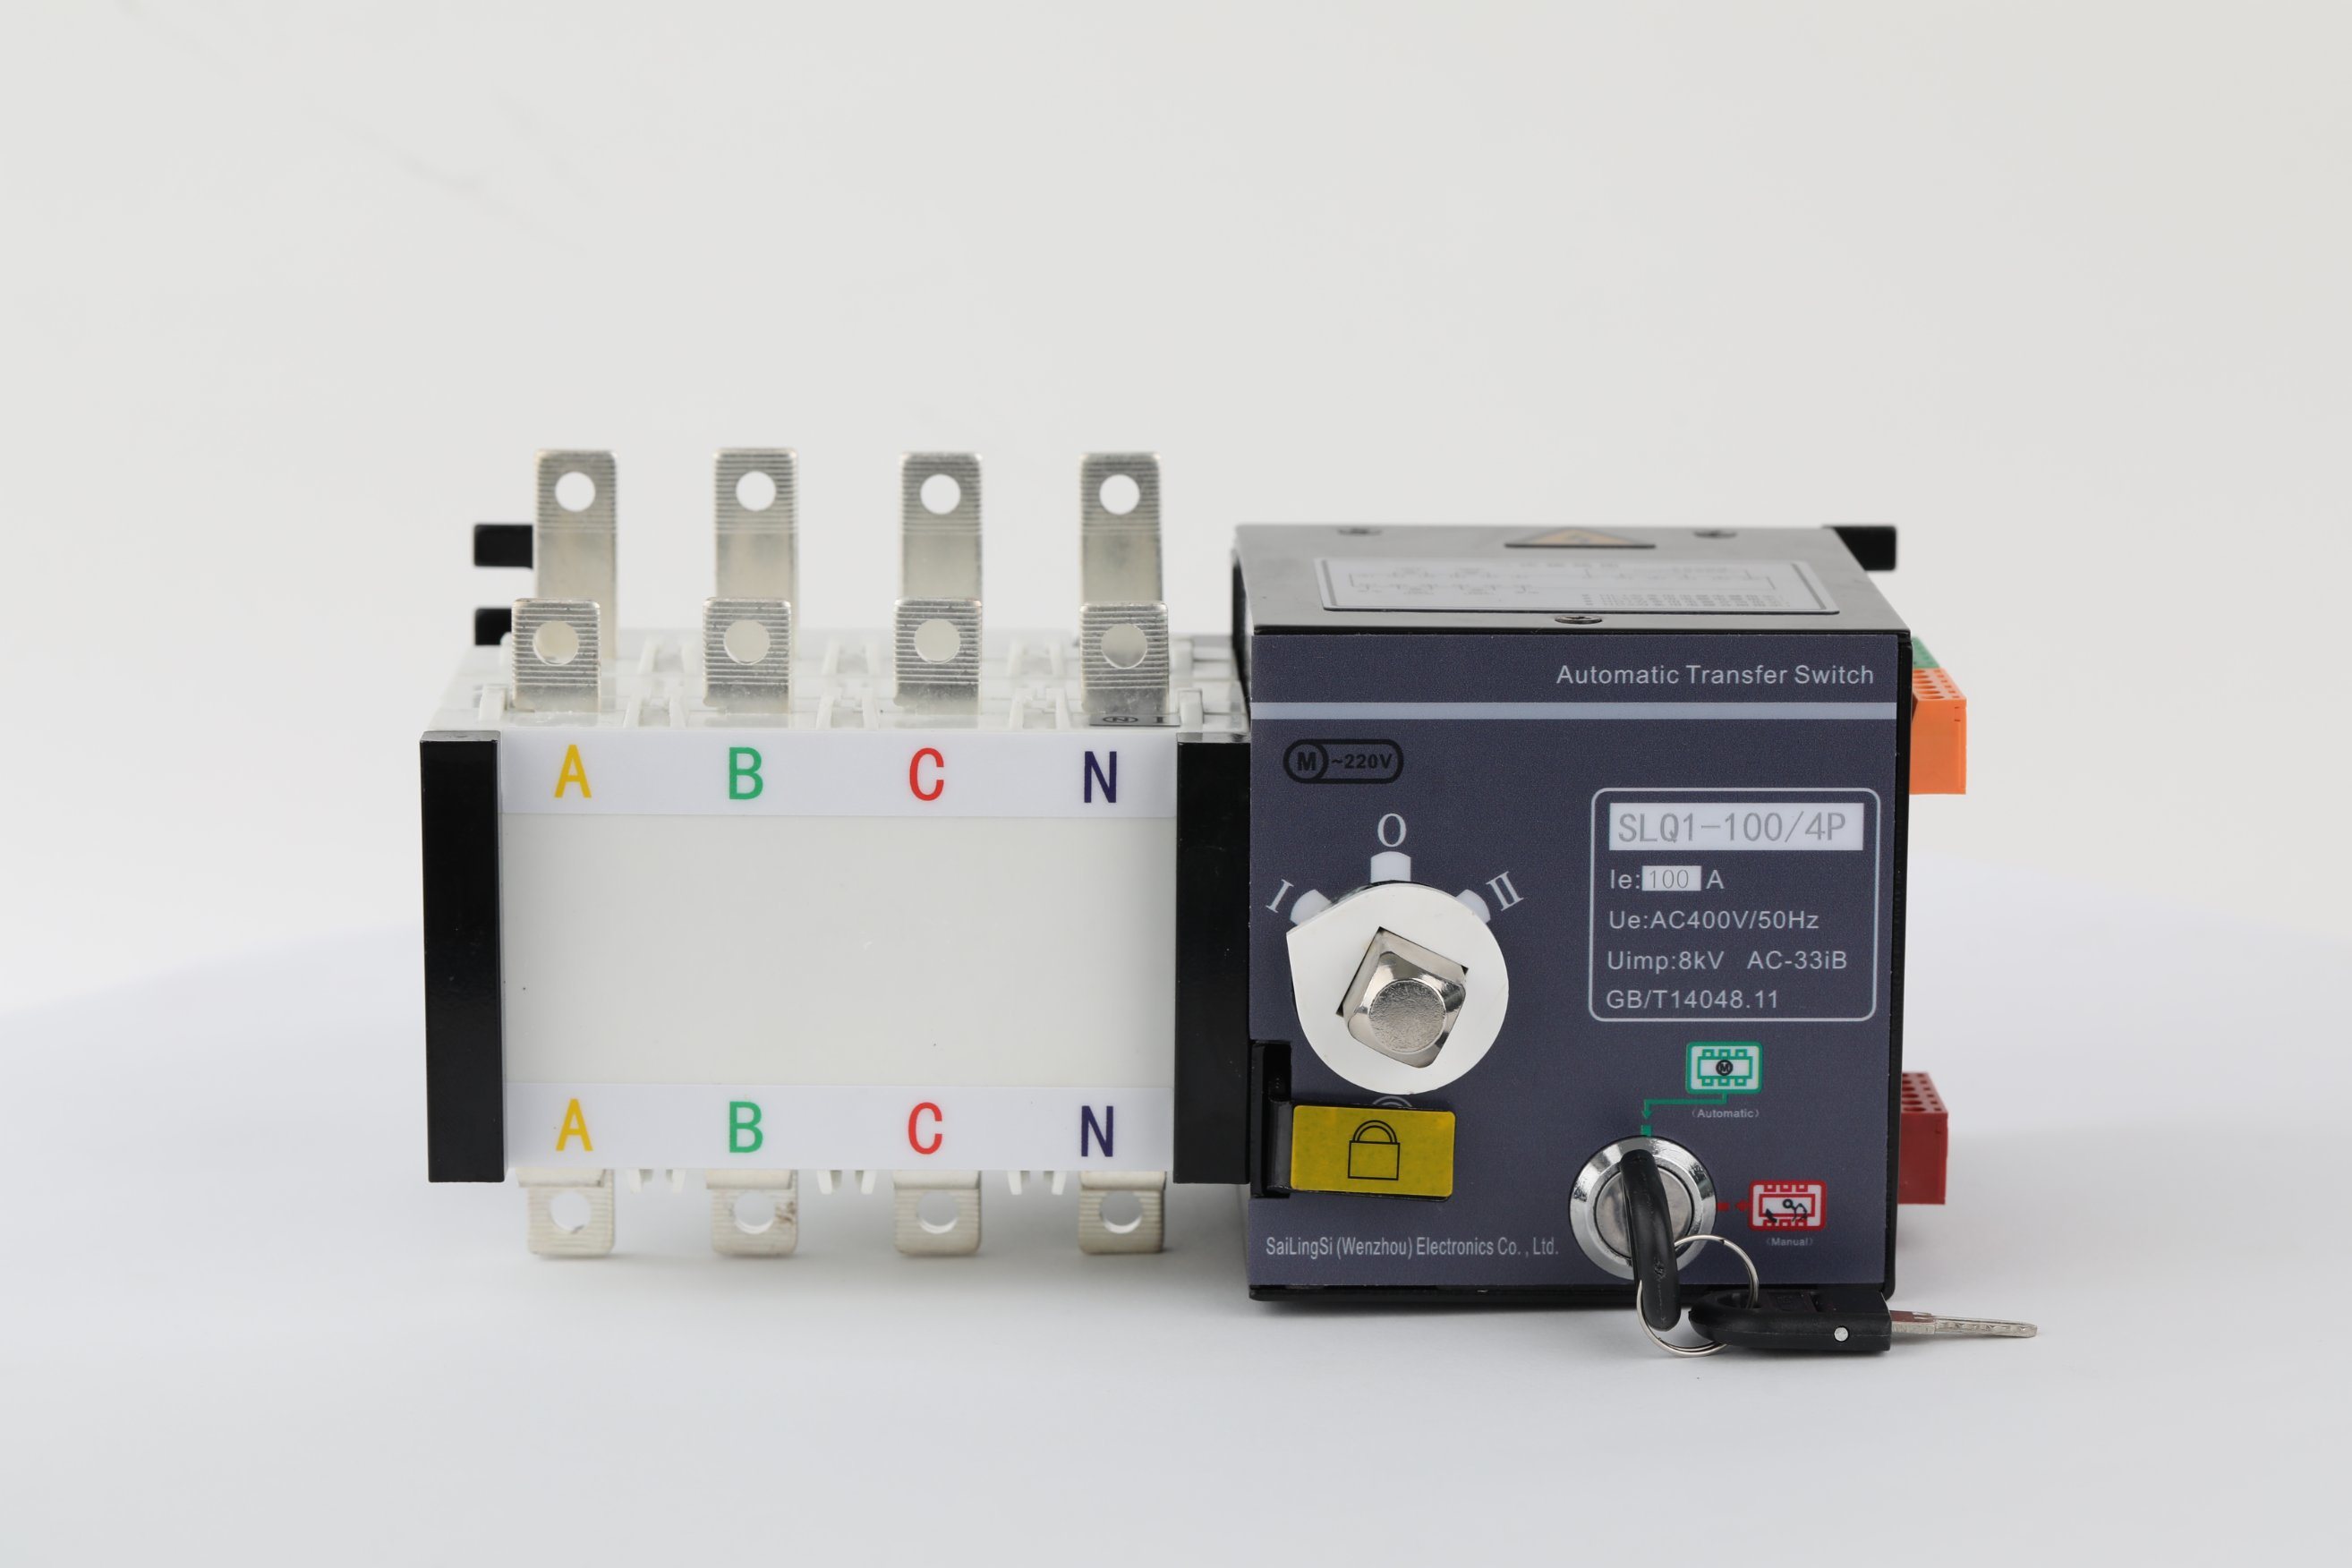 Uvq1-400A 4p ATS 400V 50Hz ATS Self Return Electric Automatic Transfer Switch with Fire Control